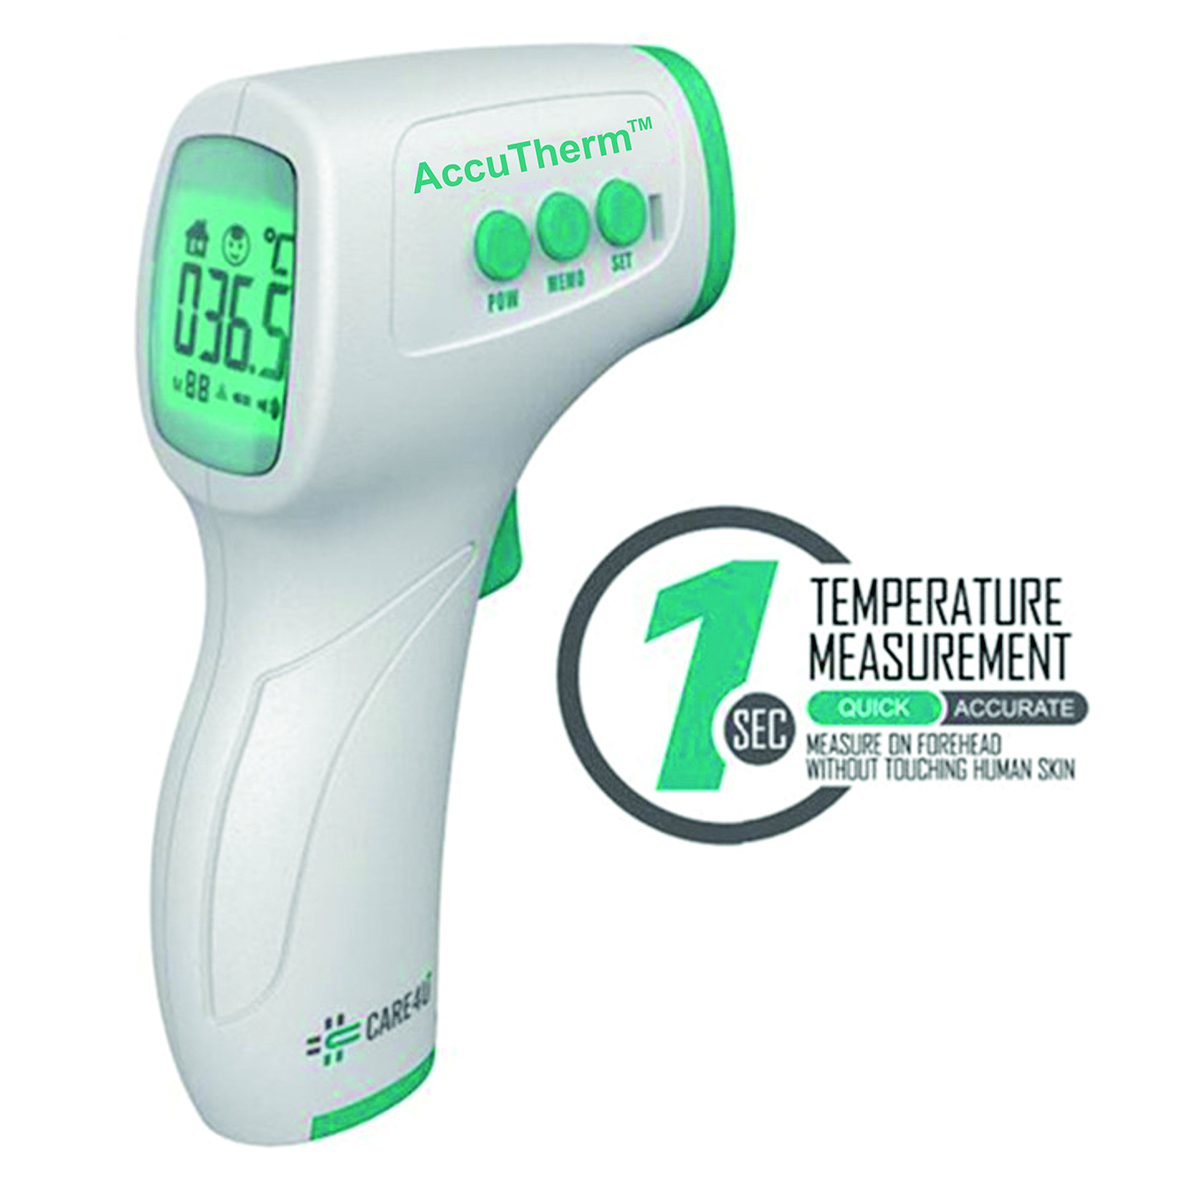 CARE4U Forehead Infrared Thermometer images